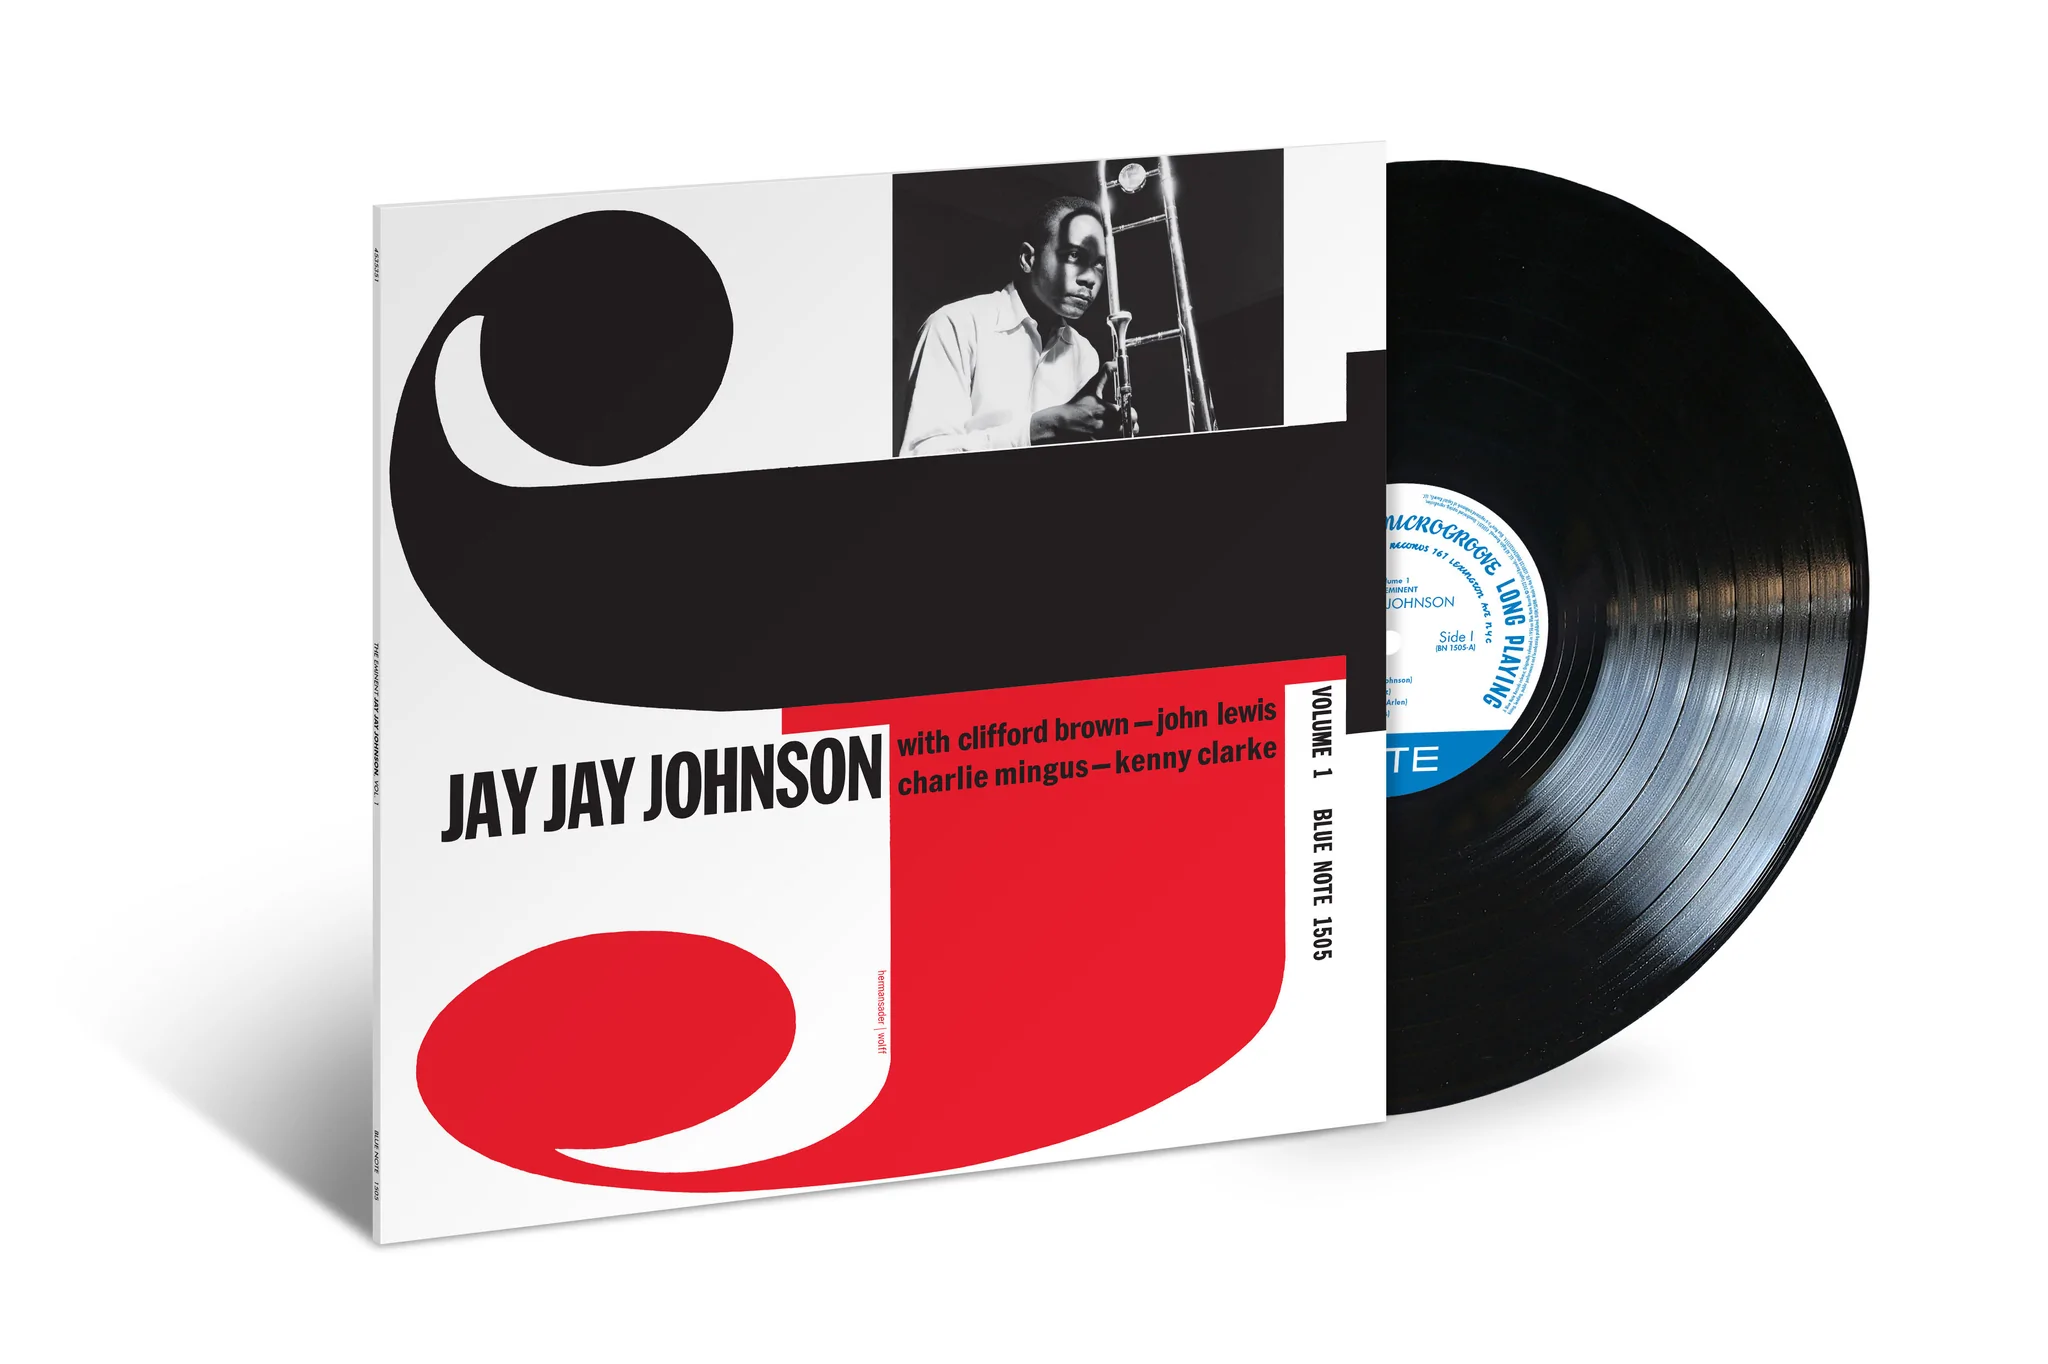 The Eminent Jay Jay Johnson (180gm Classic Series) (pre-order due 16 December)